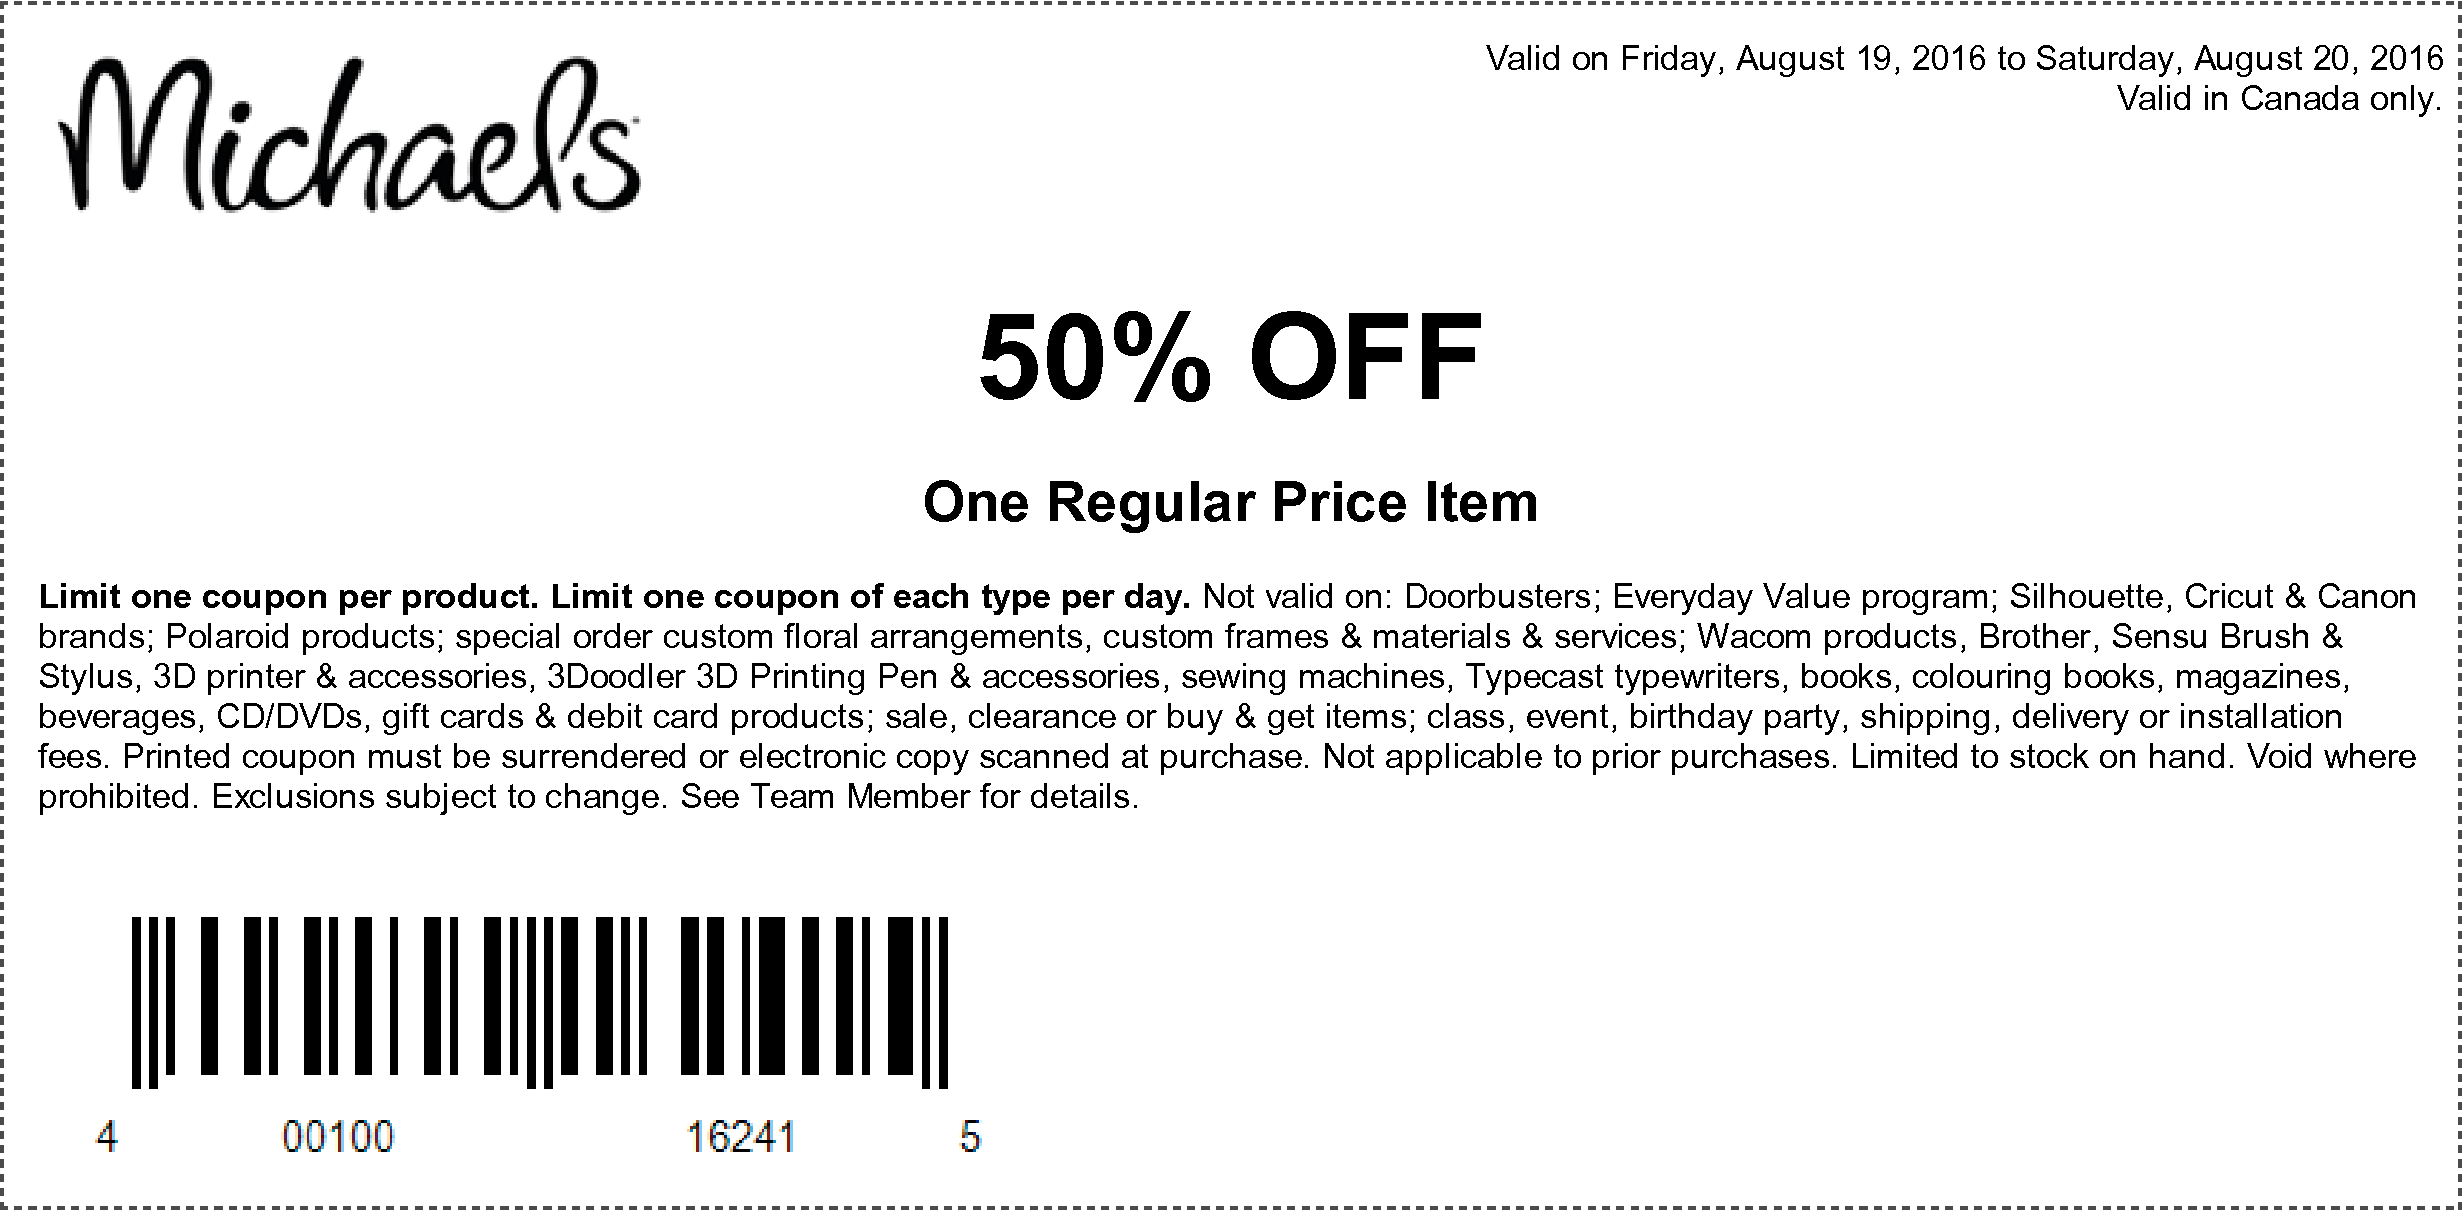 Michaels Coupon 50 Off One Regular Price Item Through August 20